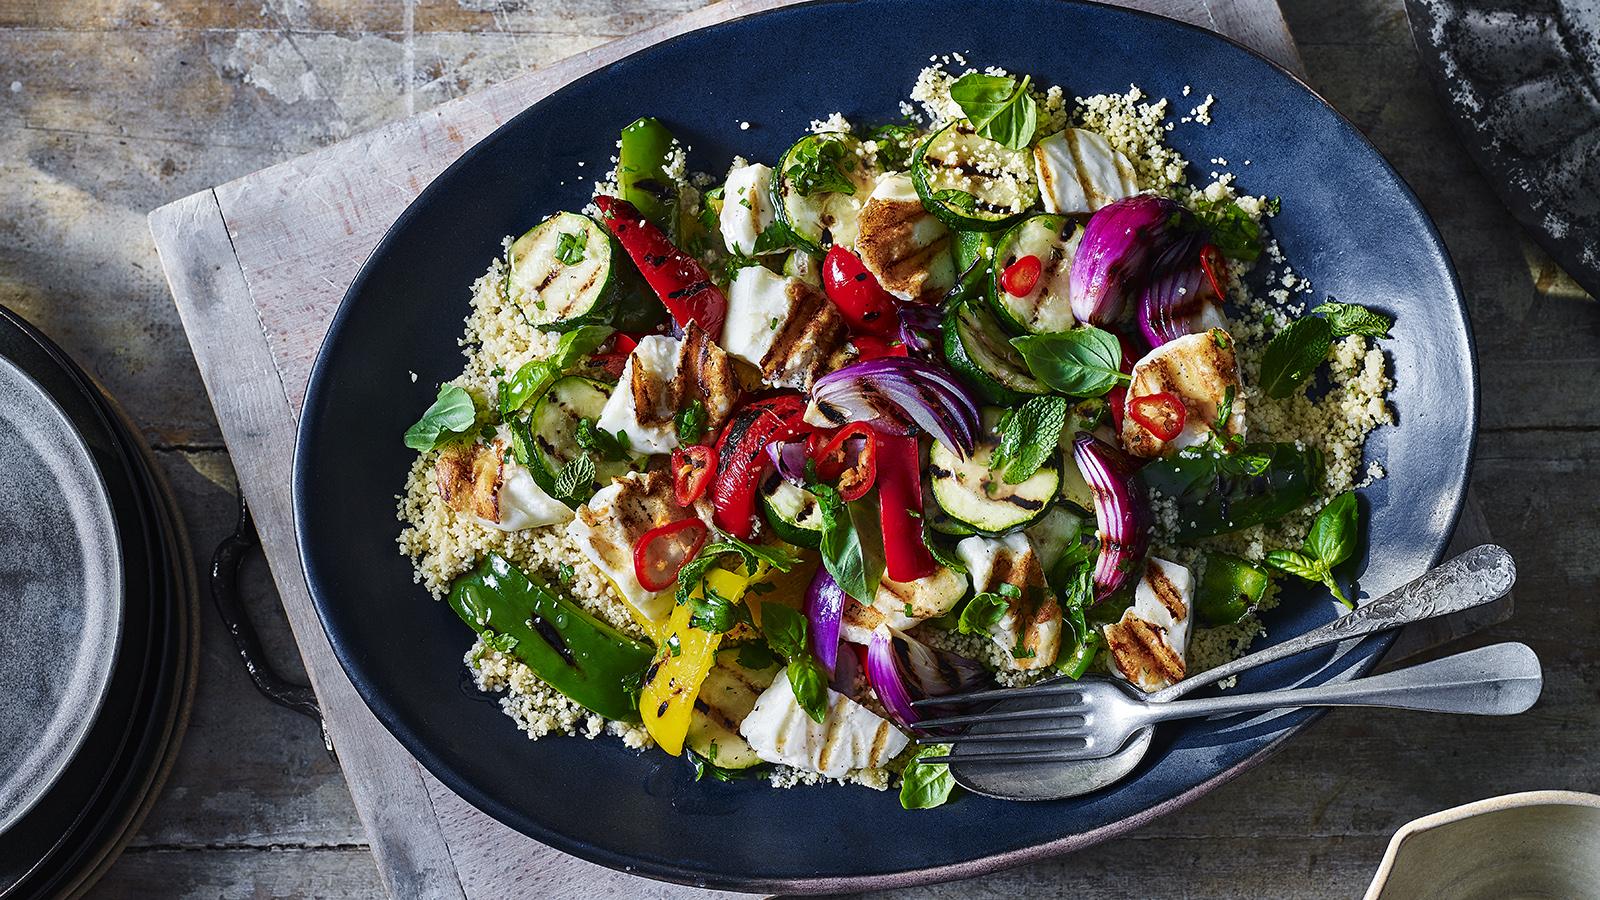 Griddled veg and halloumi with couscous recipe - BBC Food